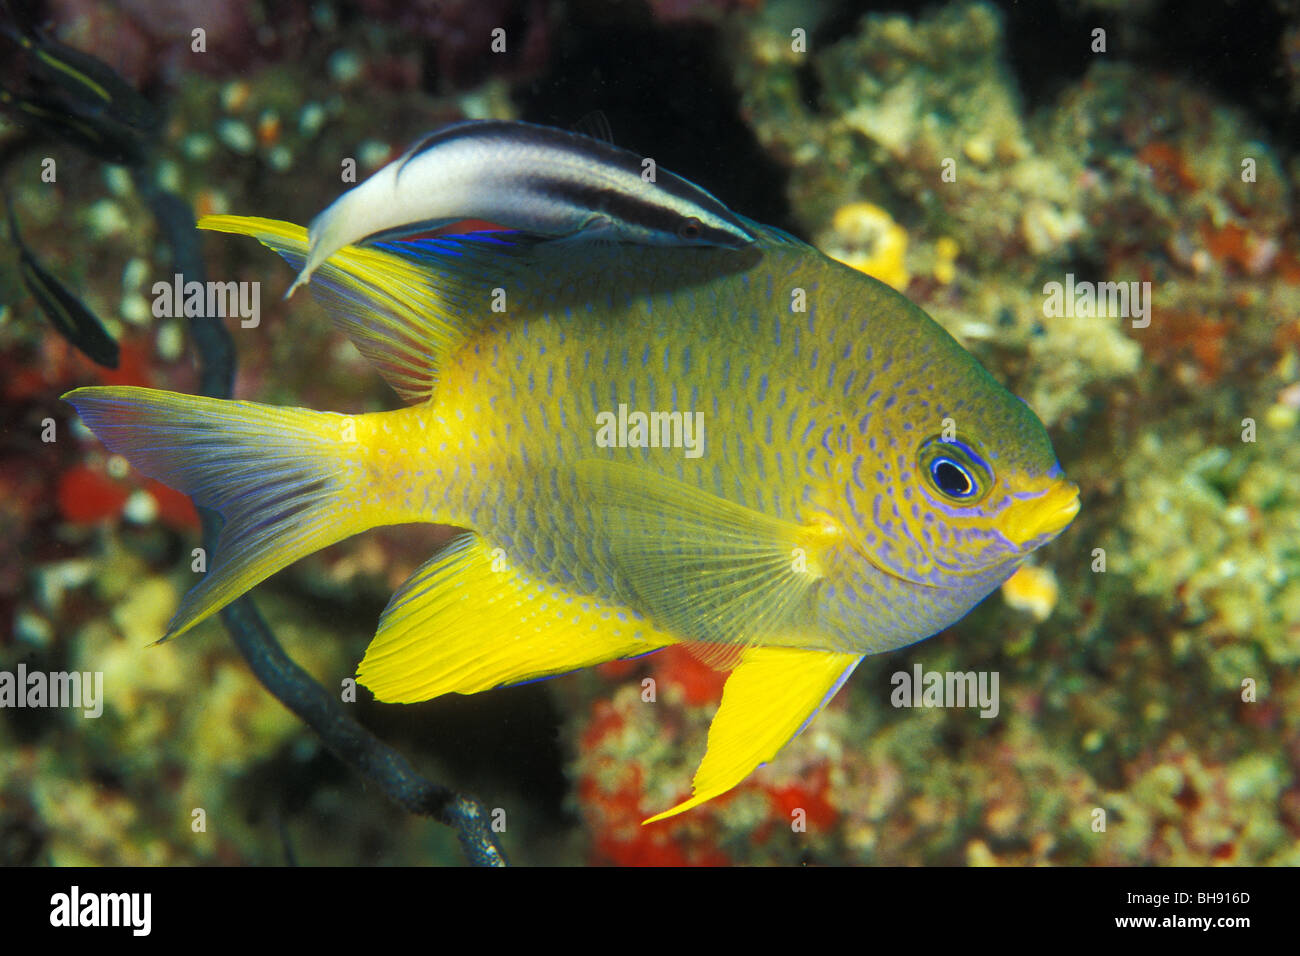 Golden Damsel cleaned by Cleaner Wrasse, Amblyglyphidodon aureus, Labroides dimidiatus, Manado, Sulawesi, Indonesia Stock Photo